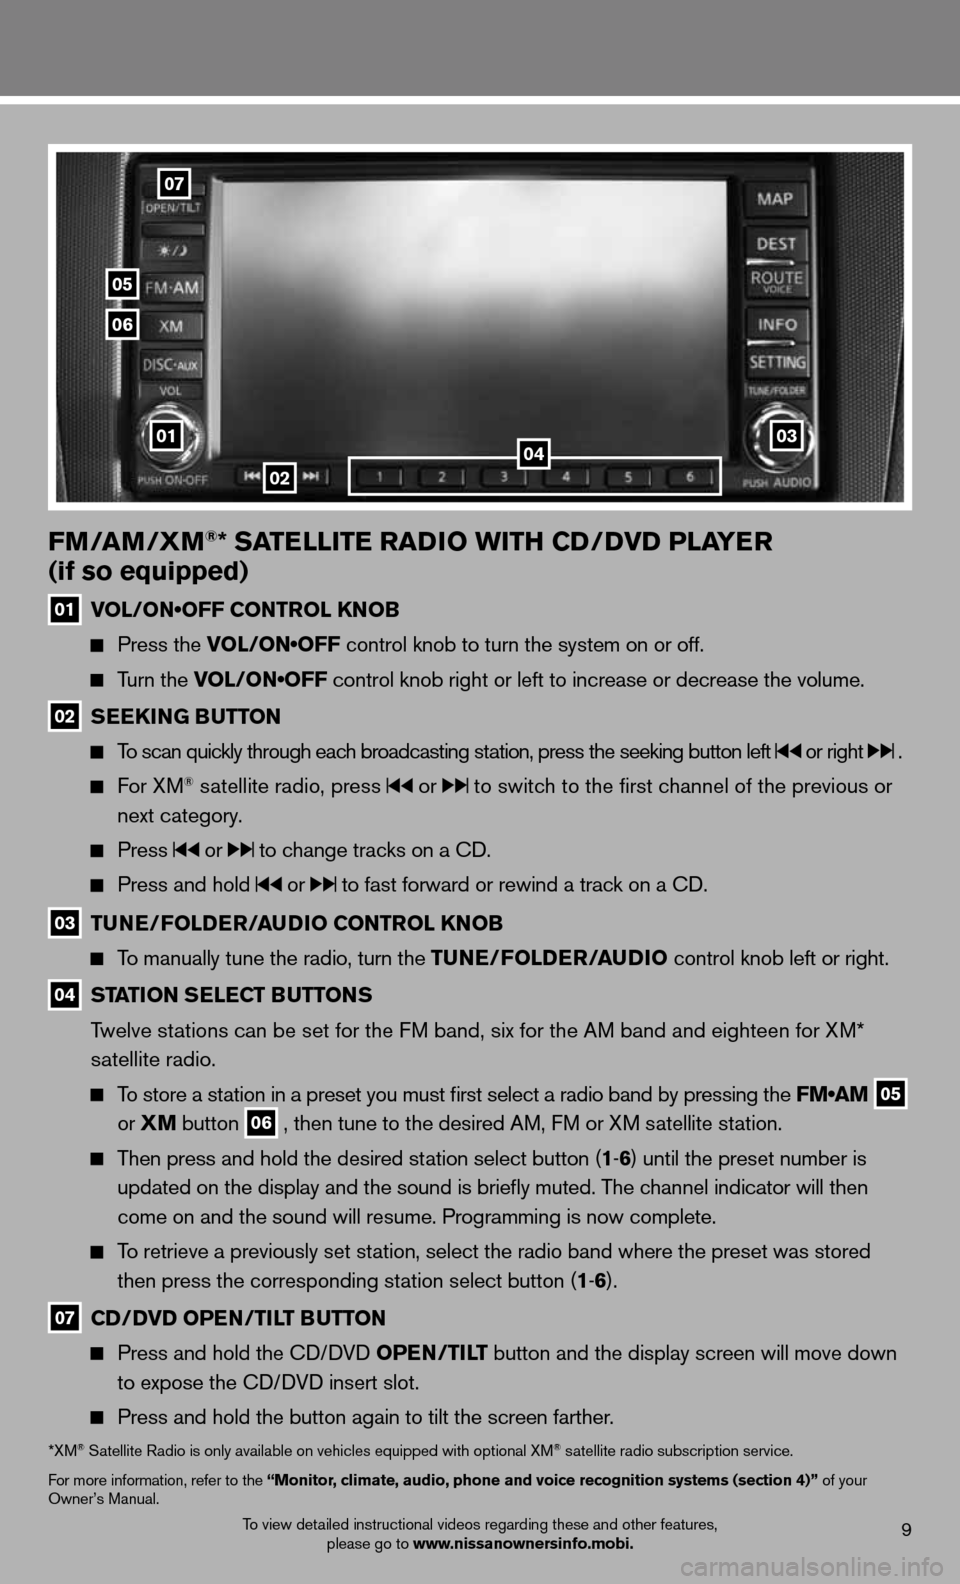 NISSAN ALTIMA COUPE 2012 D32 / 4.G Quick Reference Guide To view detailed instructional videos regarding these and other features, please go to www.nissanownersinfo.mobi.9
FM/AM/XM®* SATELLITE RADIO WITh CD/DVD PLAYER 
(if so equipped)
01  VOL/ON•OFF CON